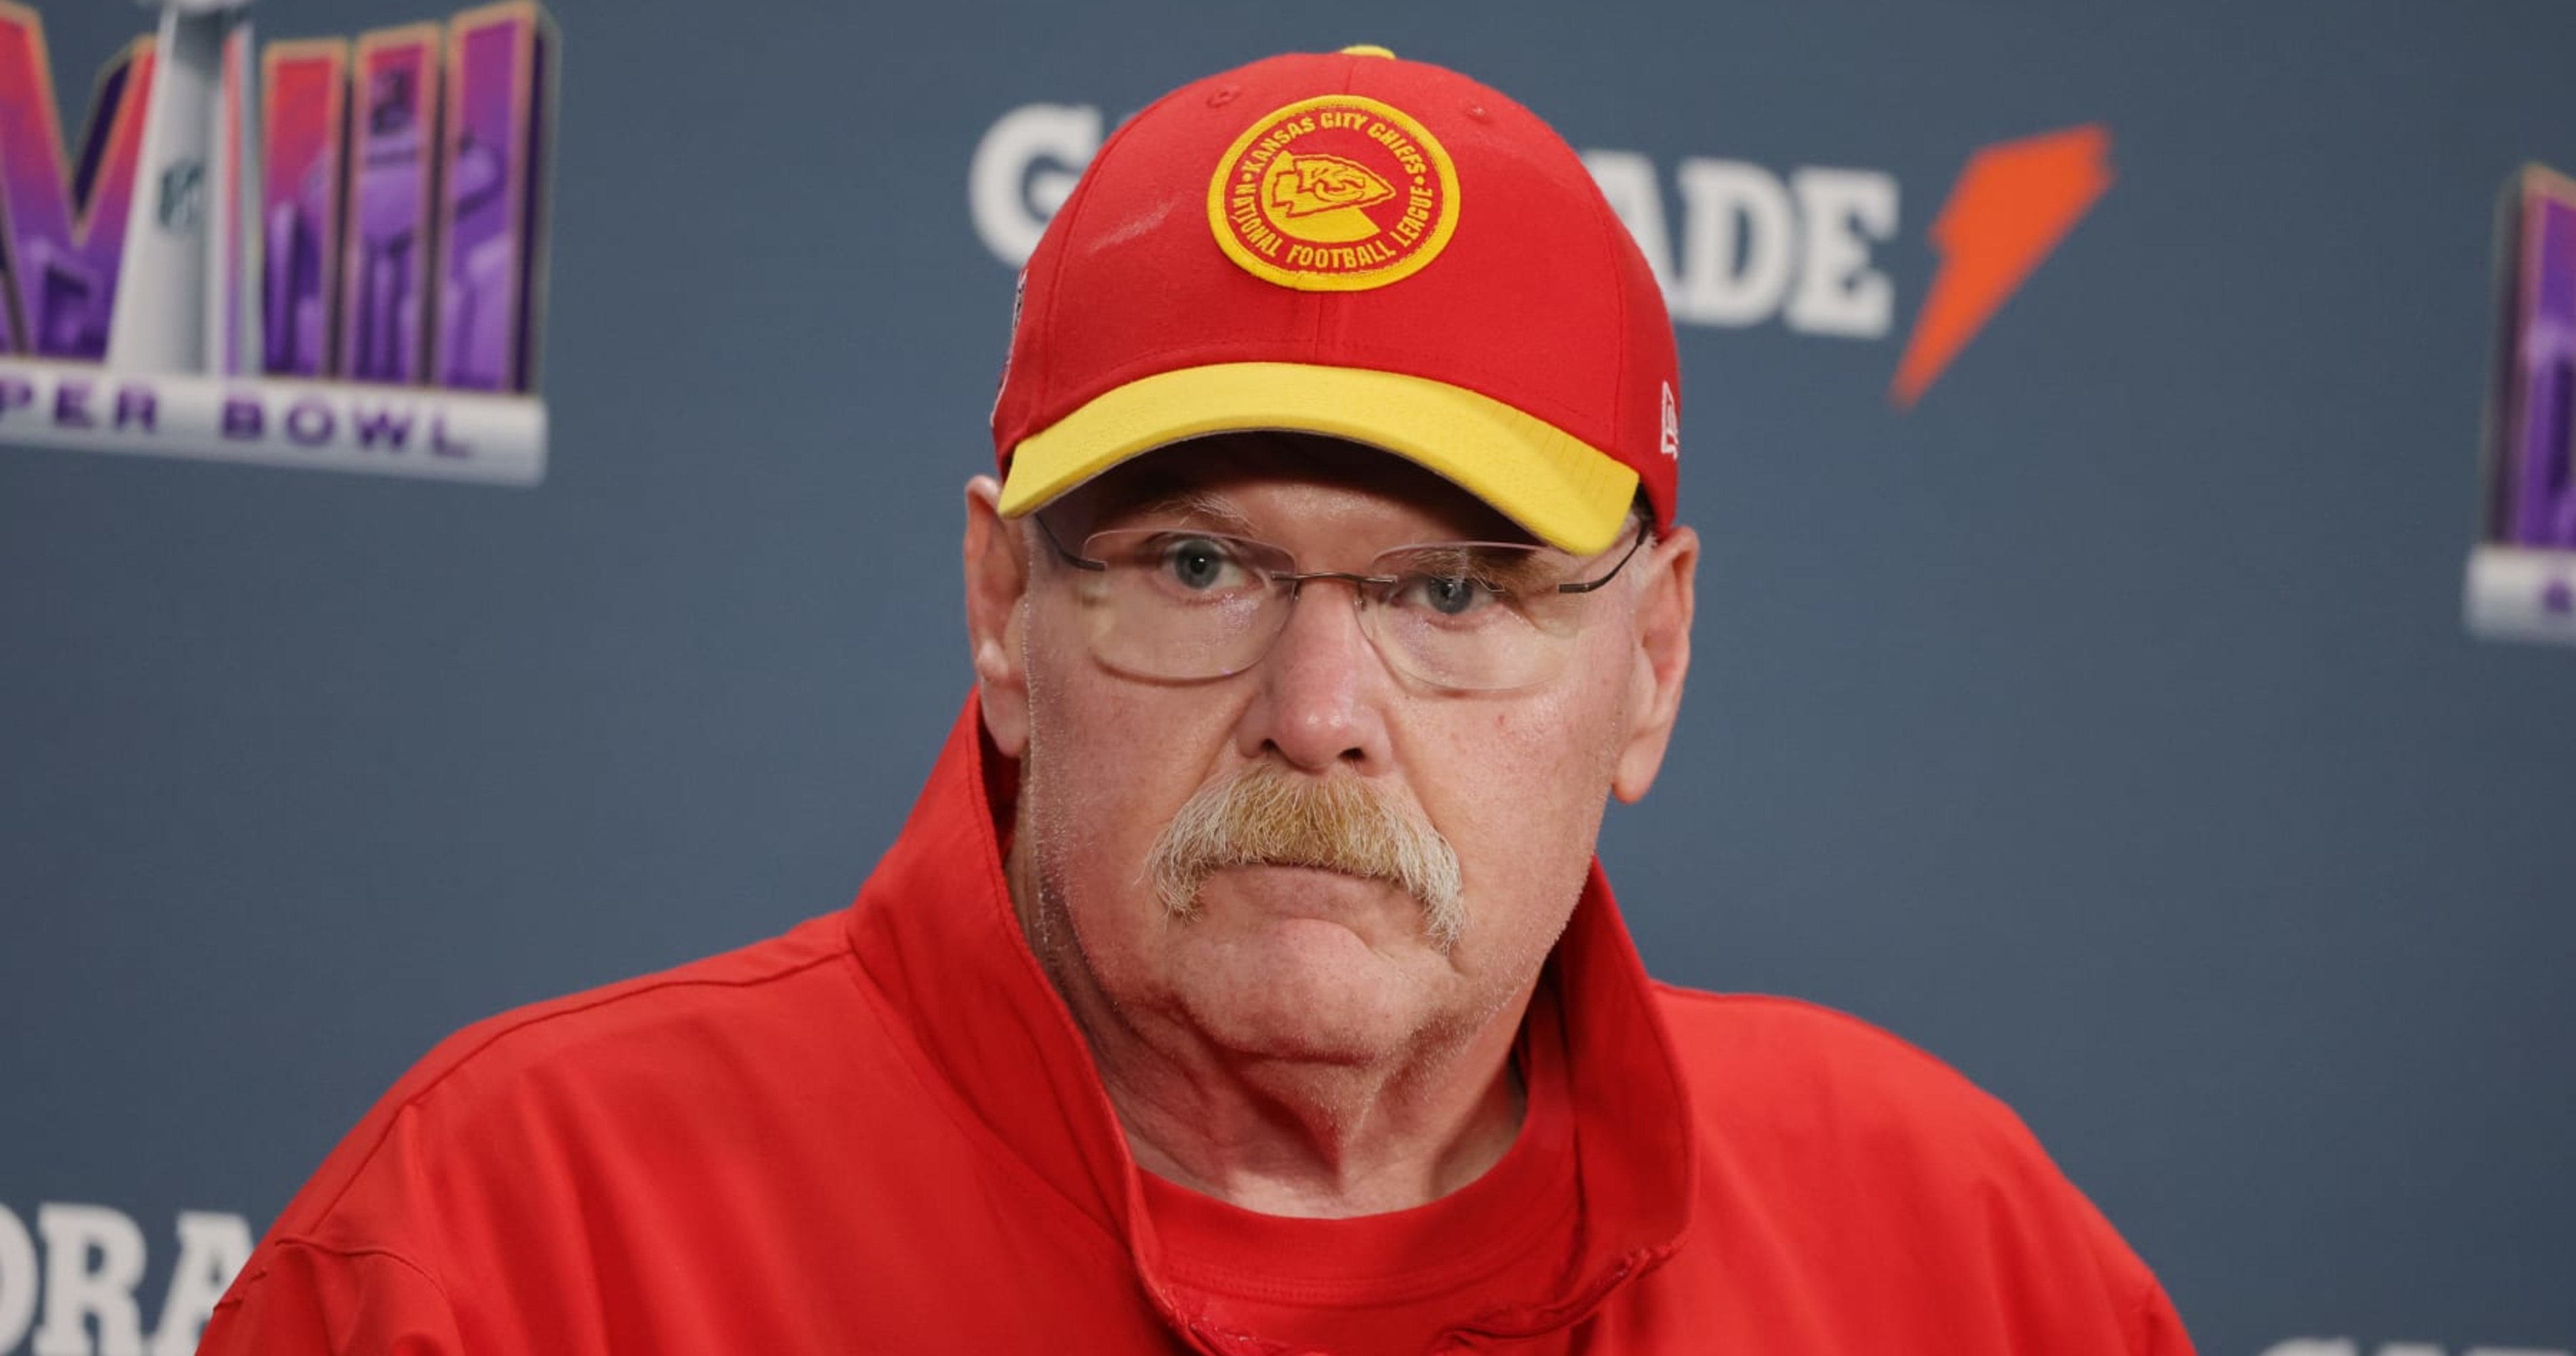 Andy Reid, Hardman, More to Make Cameos in Hallmark Channel's Chiefs Christmas Movie